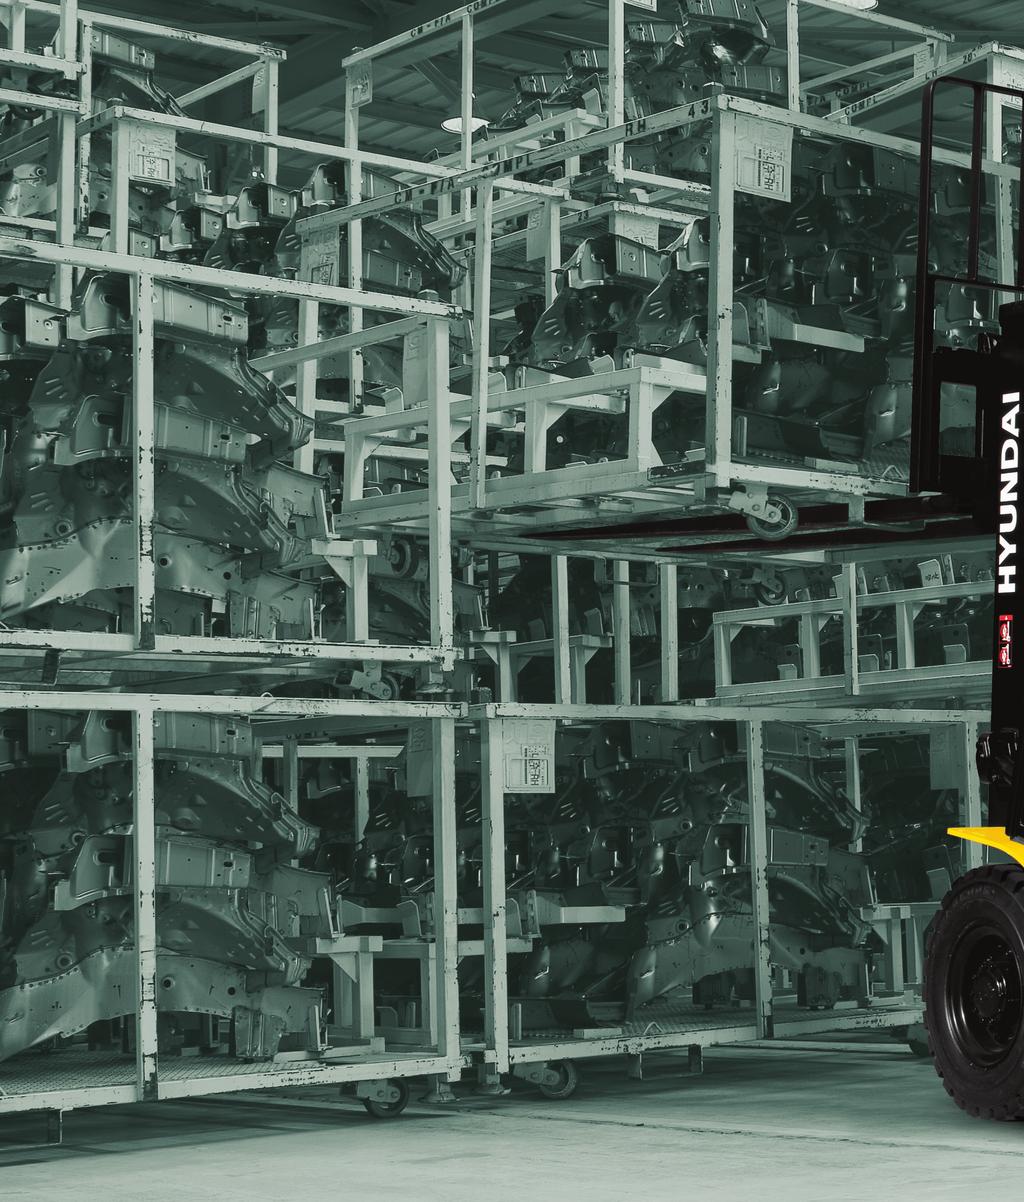 NEW criteria of Forklift Trucks Hyundai introduces a new